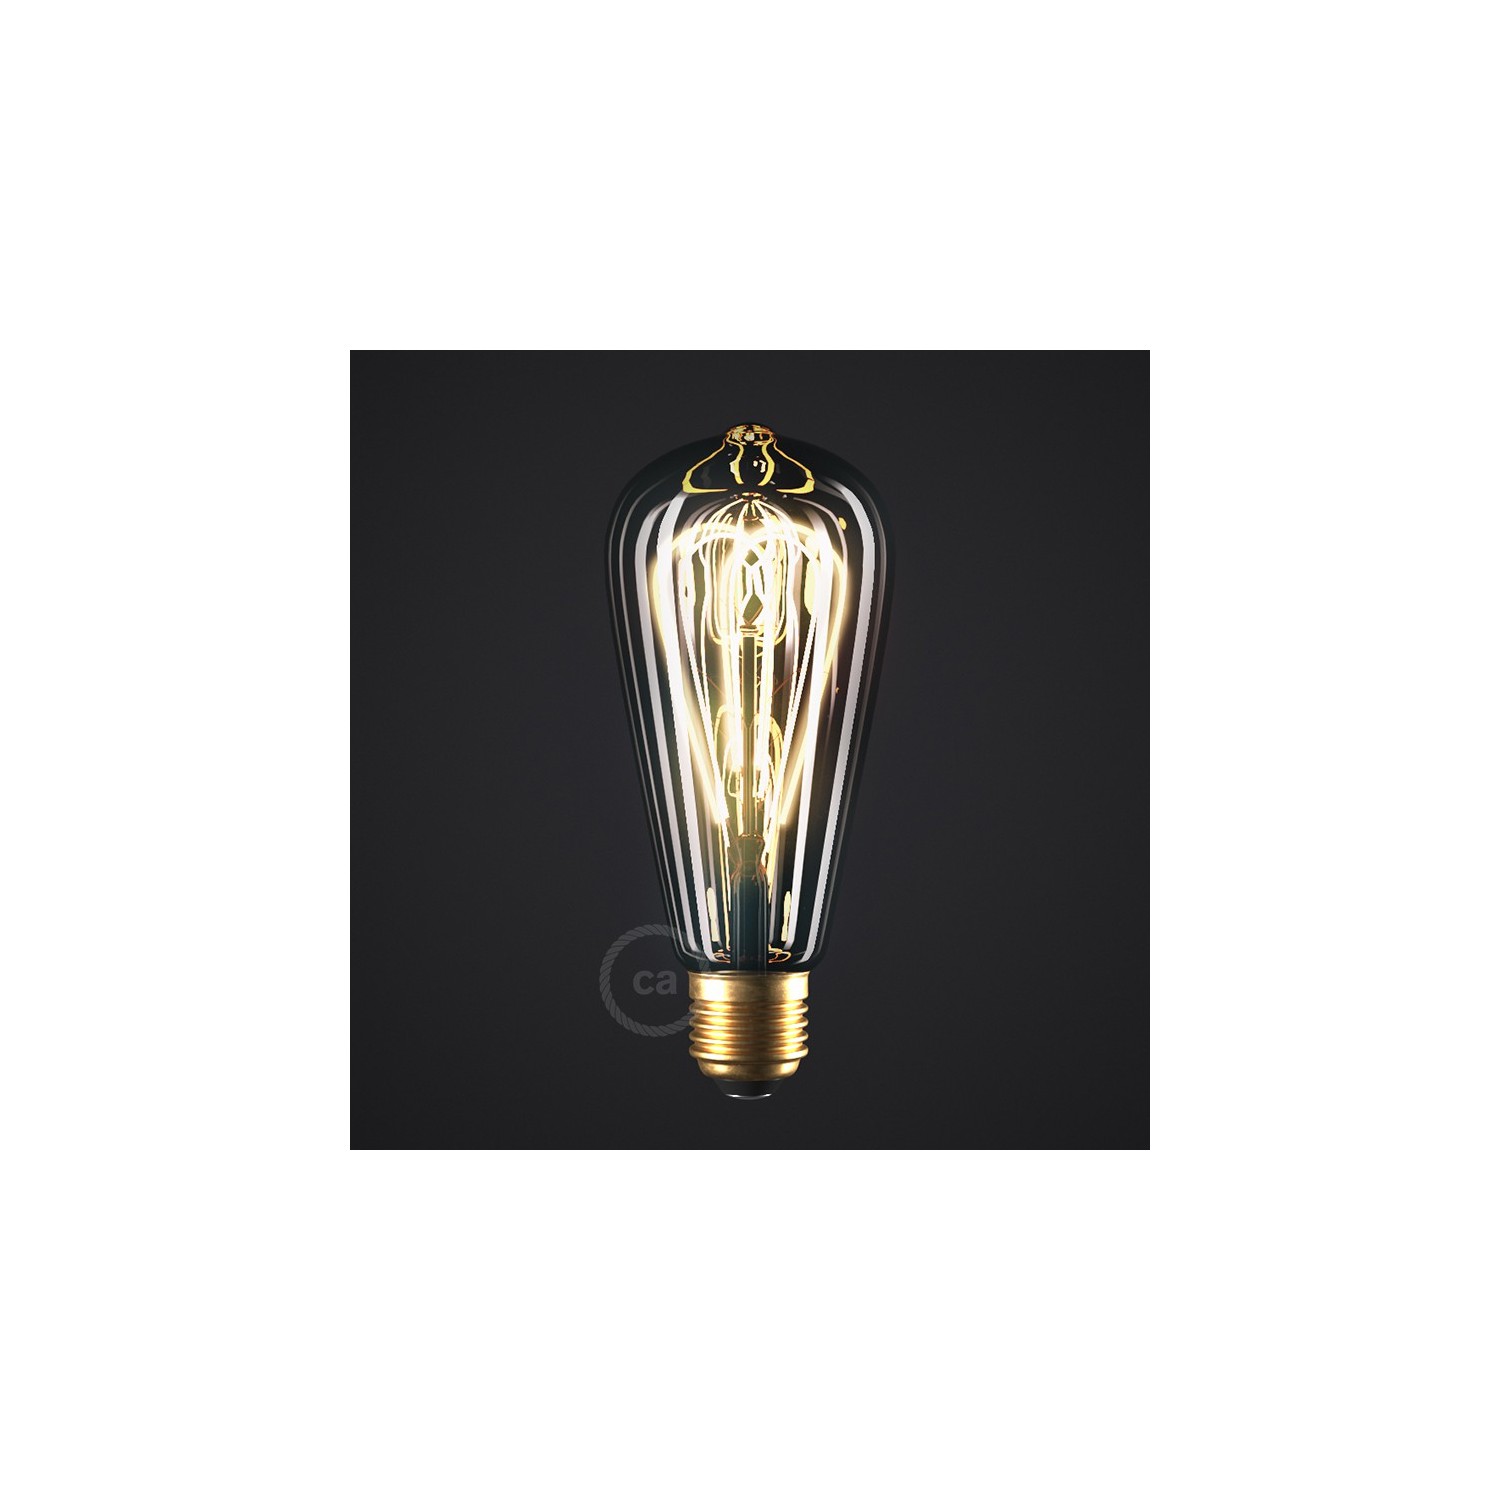 LED Lampe Smoky Edison ST64 Curved Doppelspirale Filament 5W 160Lm E27 1800K Dimmbar